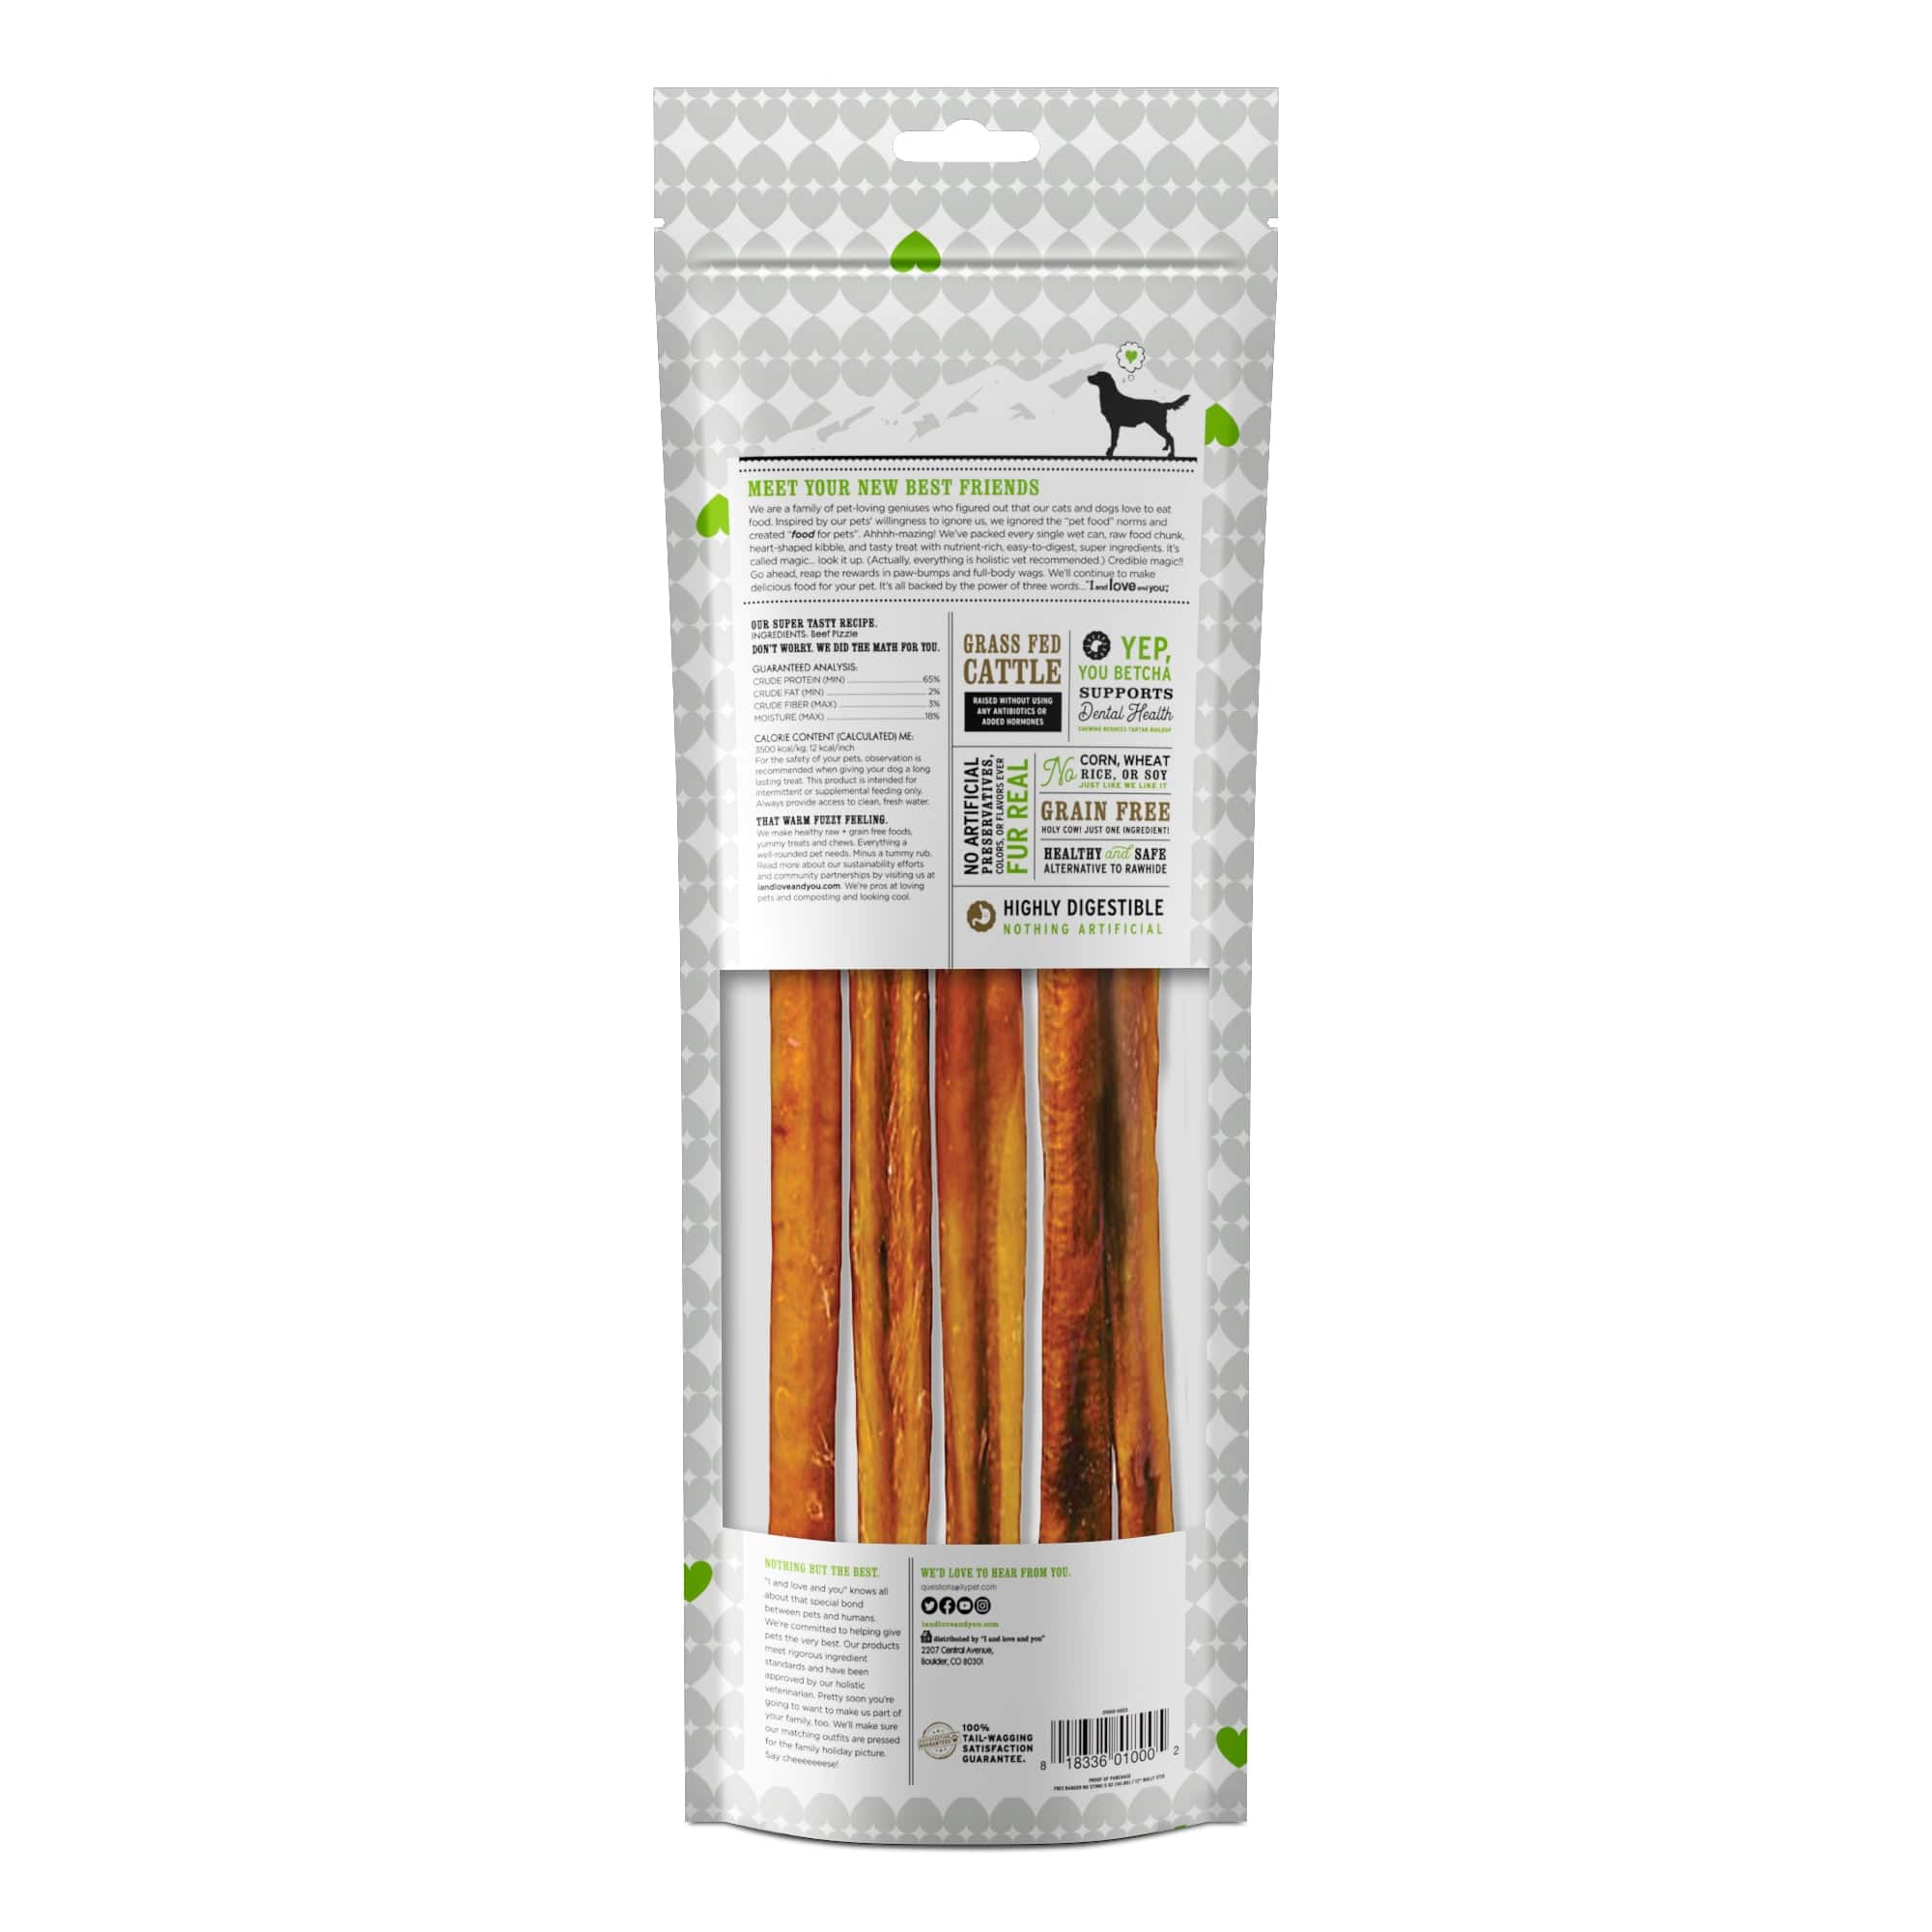 No Stink! Free Ranger Bully Stix 12 package with dog treats, chews, and sticks. Package back side.